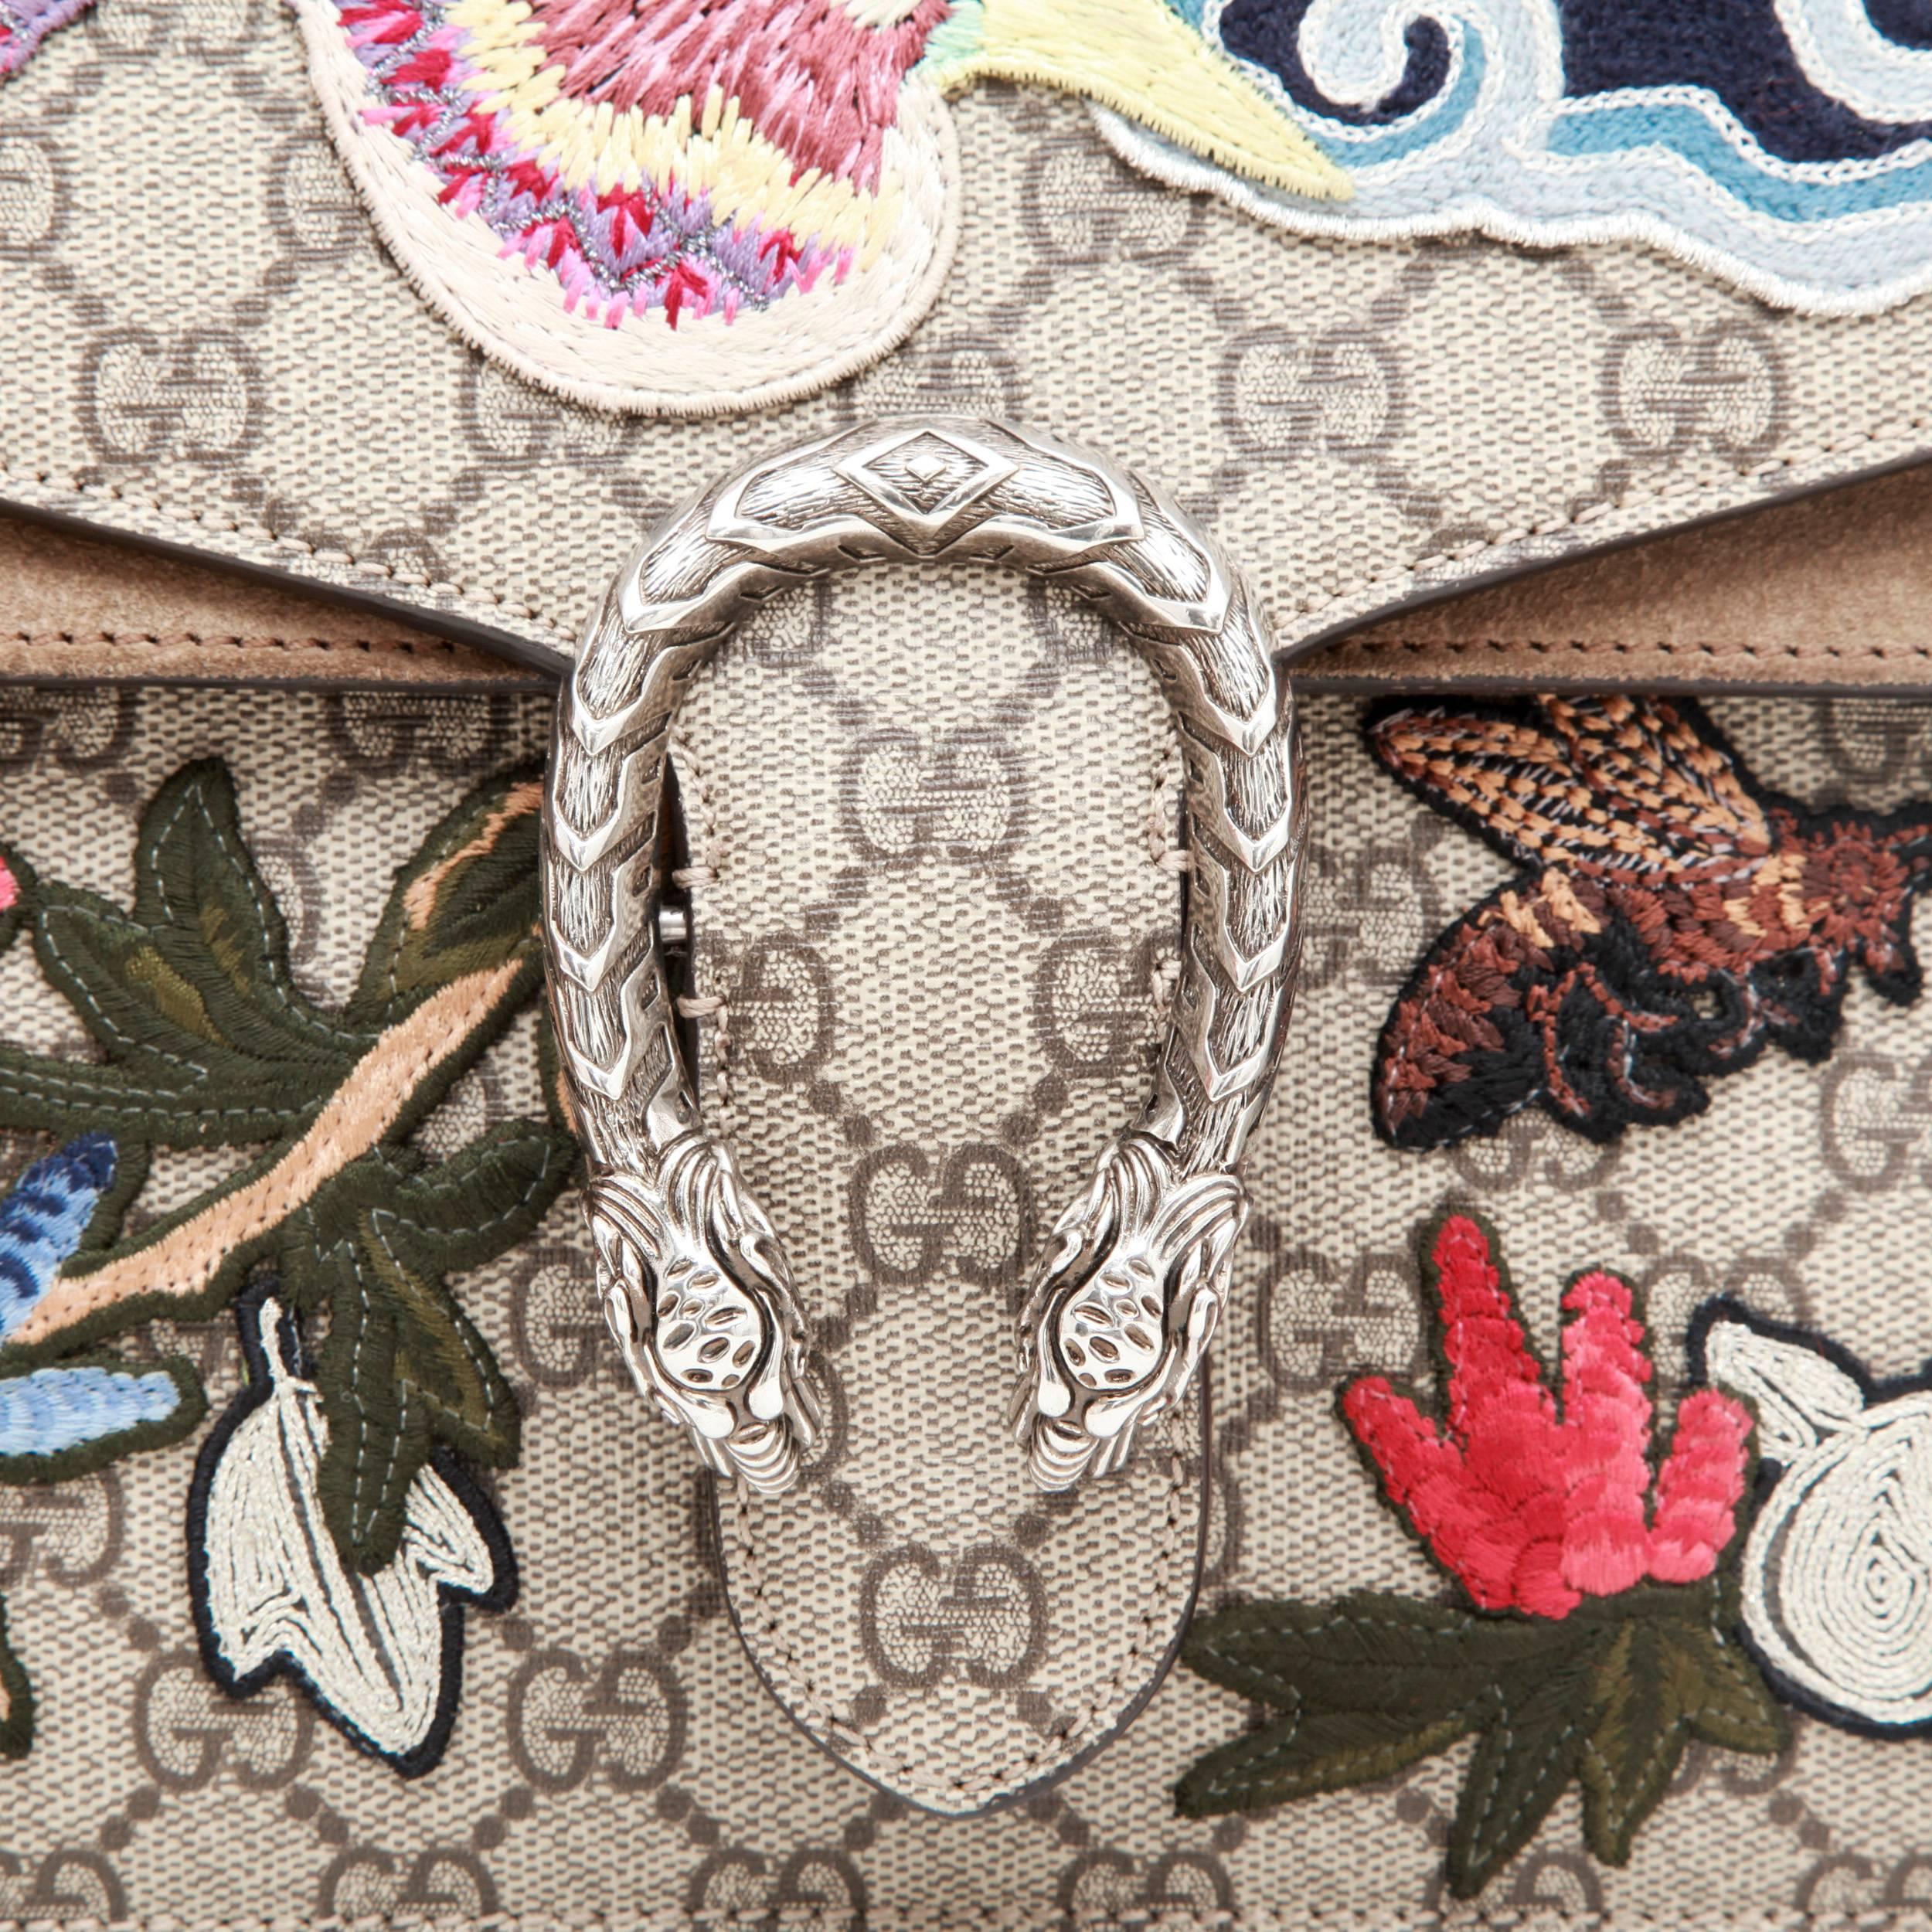 Women's GUCCI Dionysus Flap Bag in GG Supreme Canvas with Suede and Embroideries